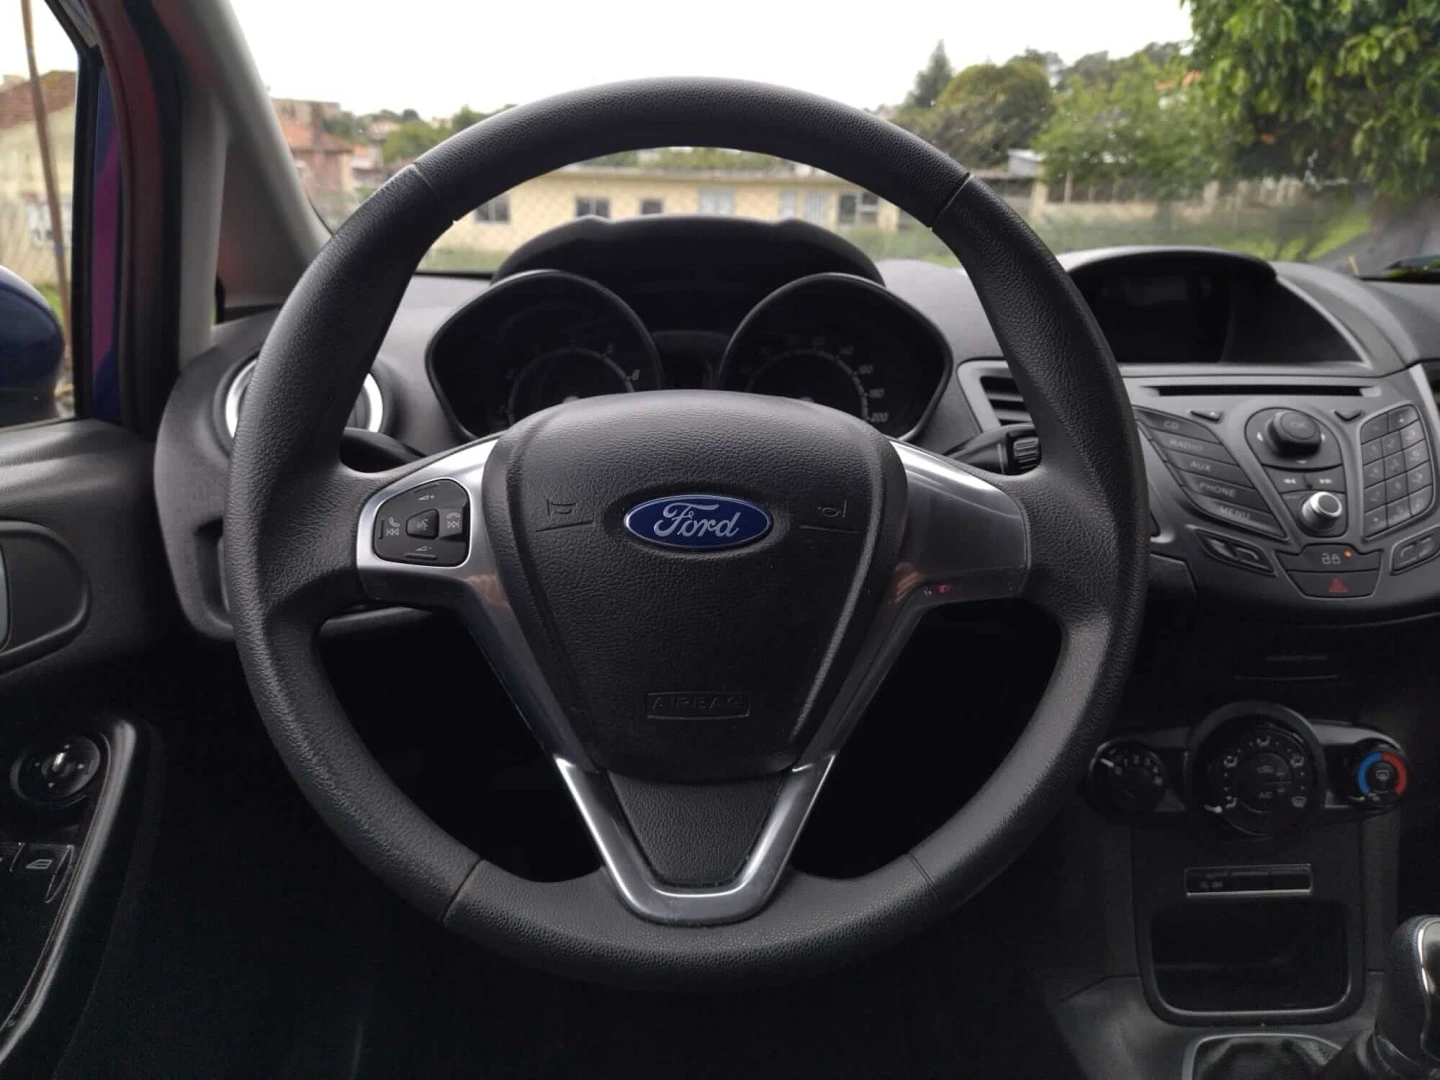 Ford Fiesta 1.0 T EcoBoost Trend